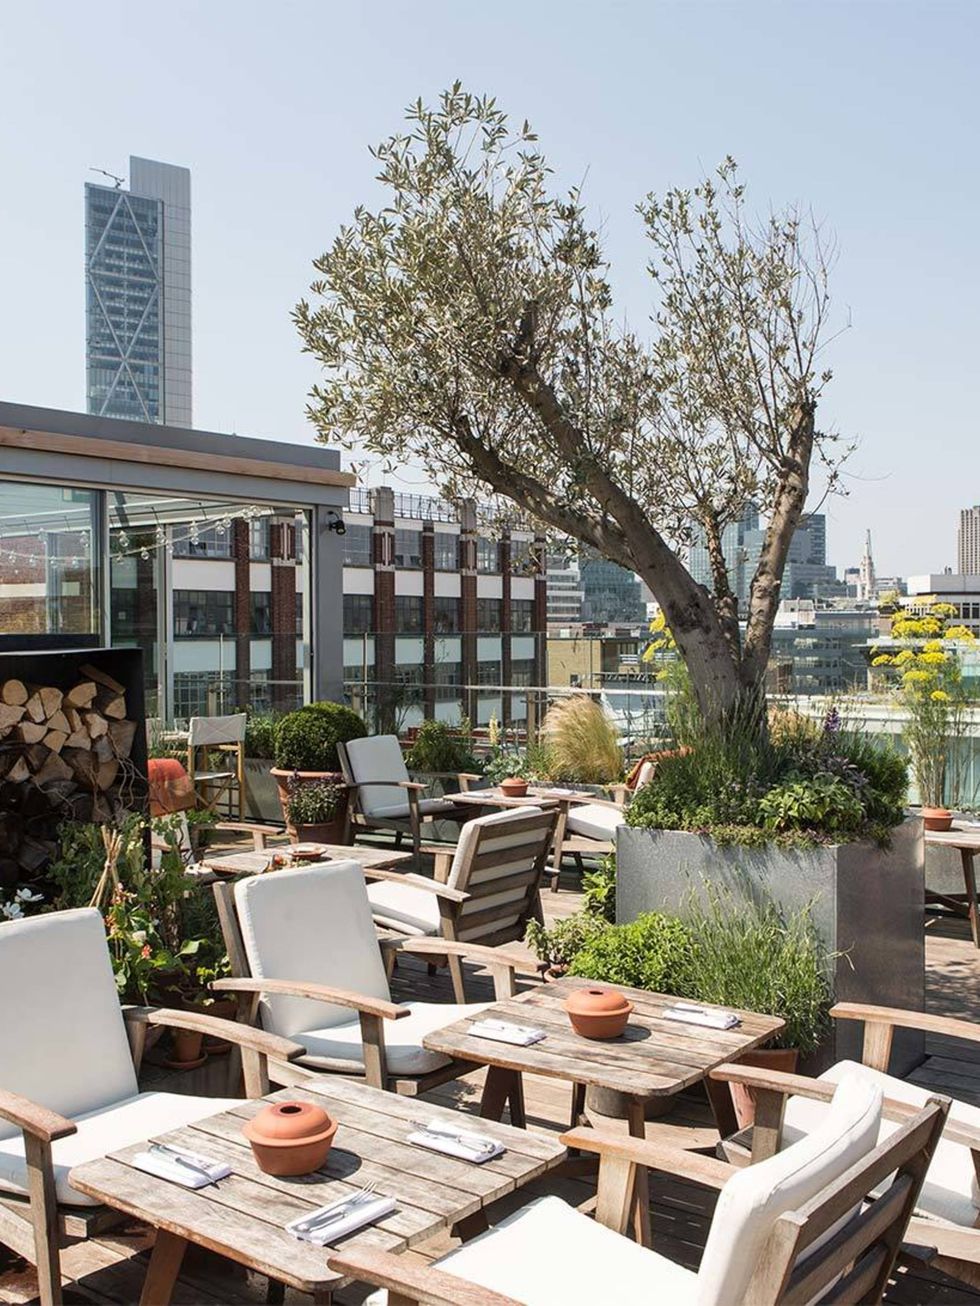 EAT: Brunch at Albion Neo Bankside

On the weekend a boring breakfast just wont cut it. Head down to the Albion, the Terence Conran owned and designed restaurant just behind Tate Modern.

Overlooking a beautiful garden, the restaurant offers a menu of fi